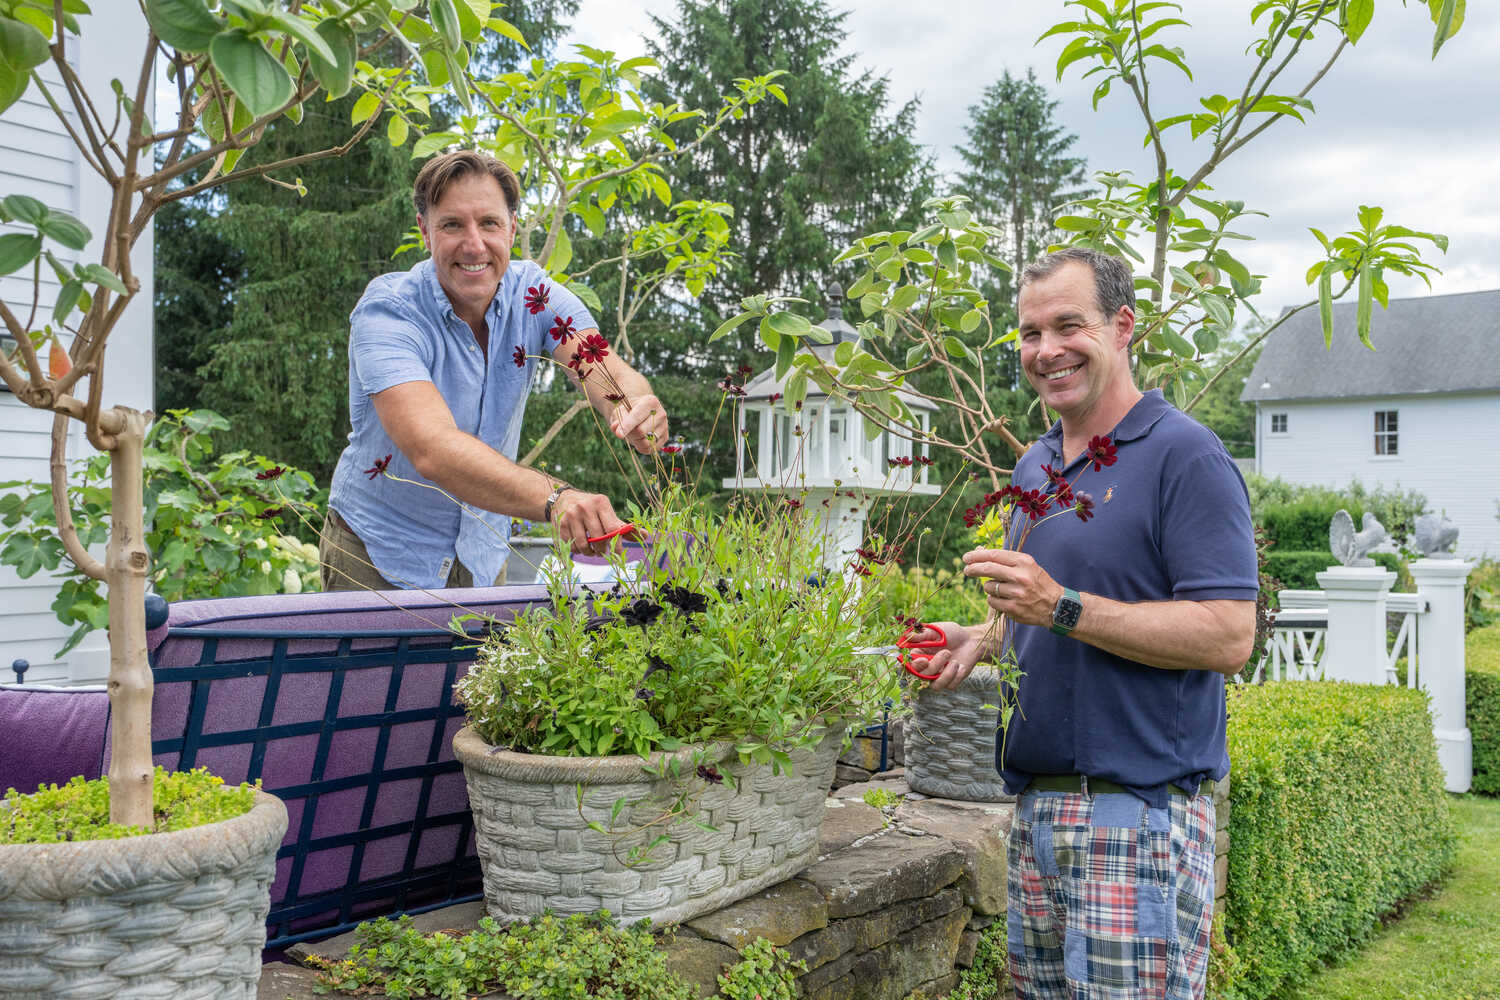 Anthony Bellomo, left, and Christopher Spitzmiller often decorate their house in Millbrook, N.Y., with flowers from the garden. (Here, they cut chocolate cosmos from a container.)